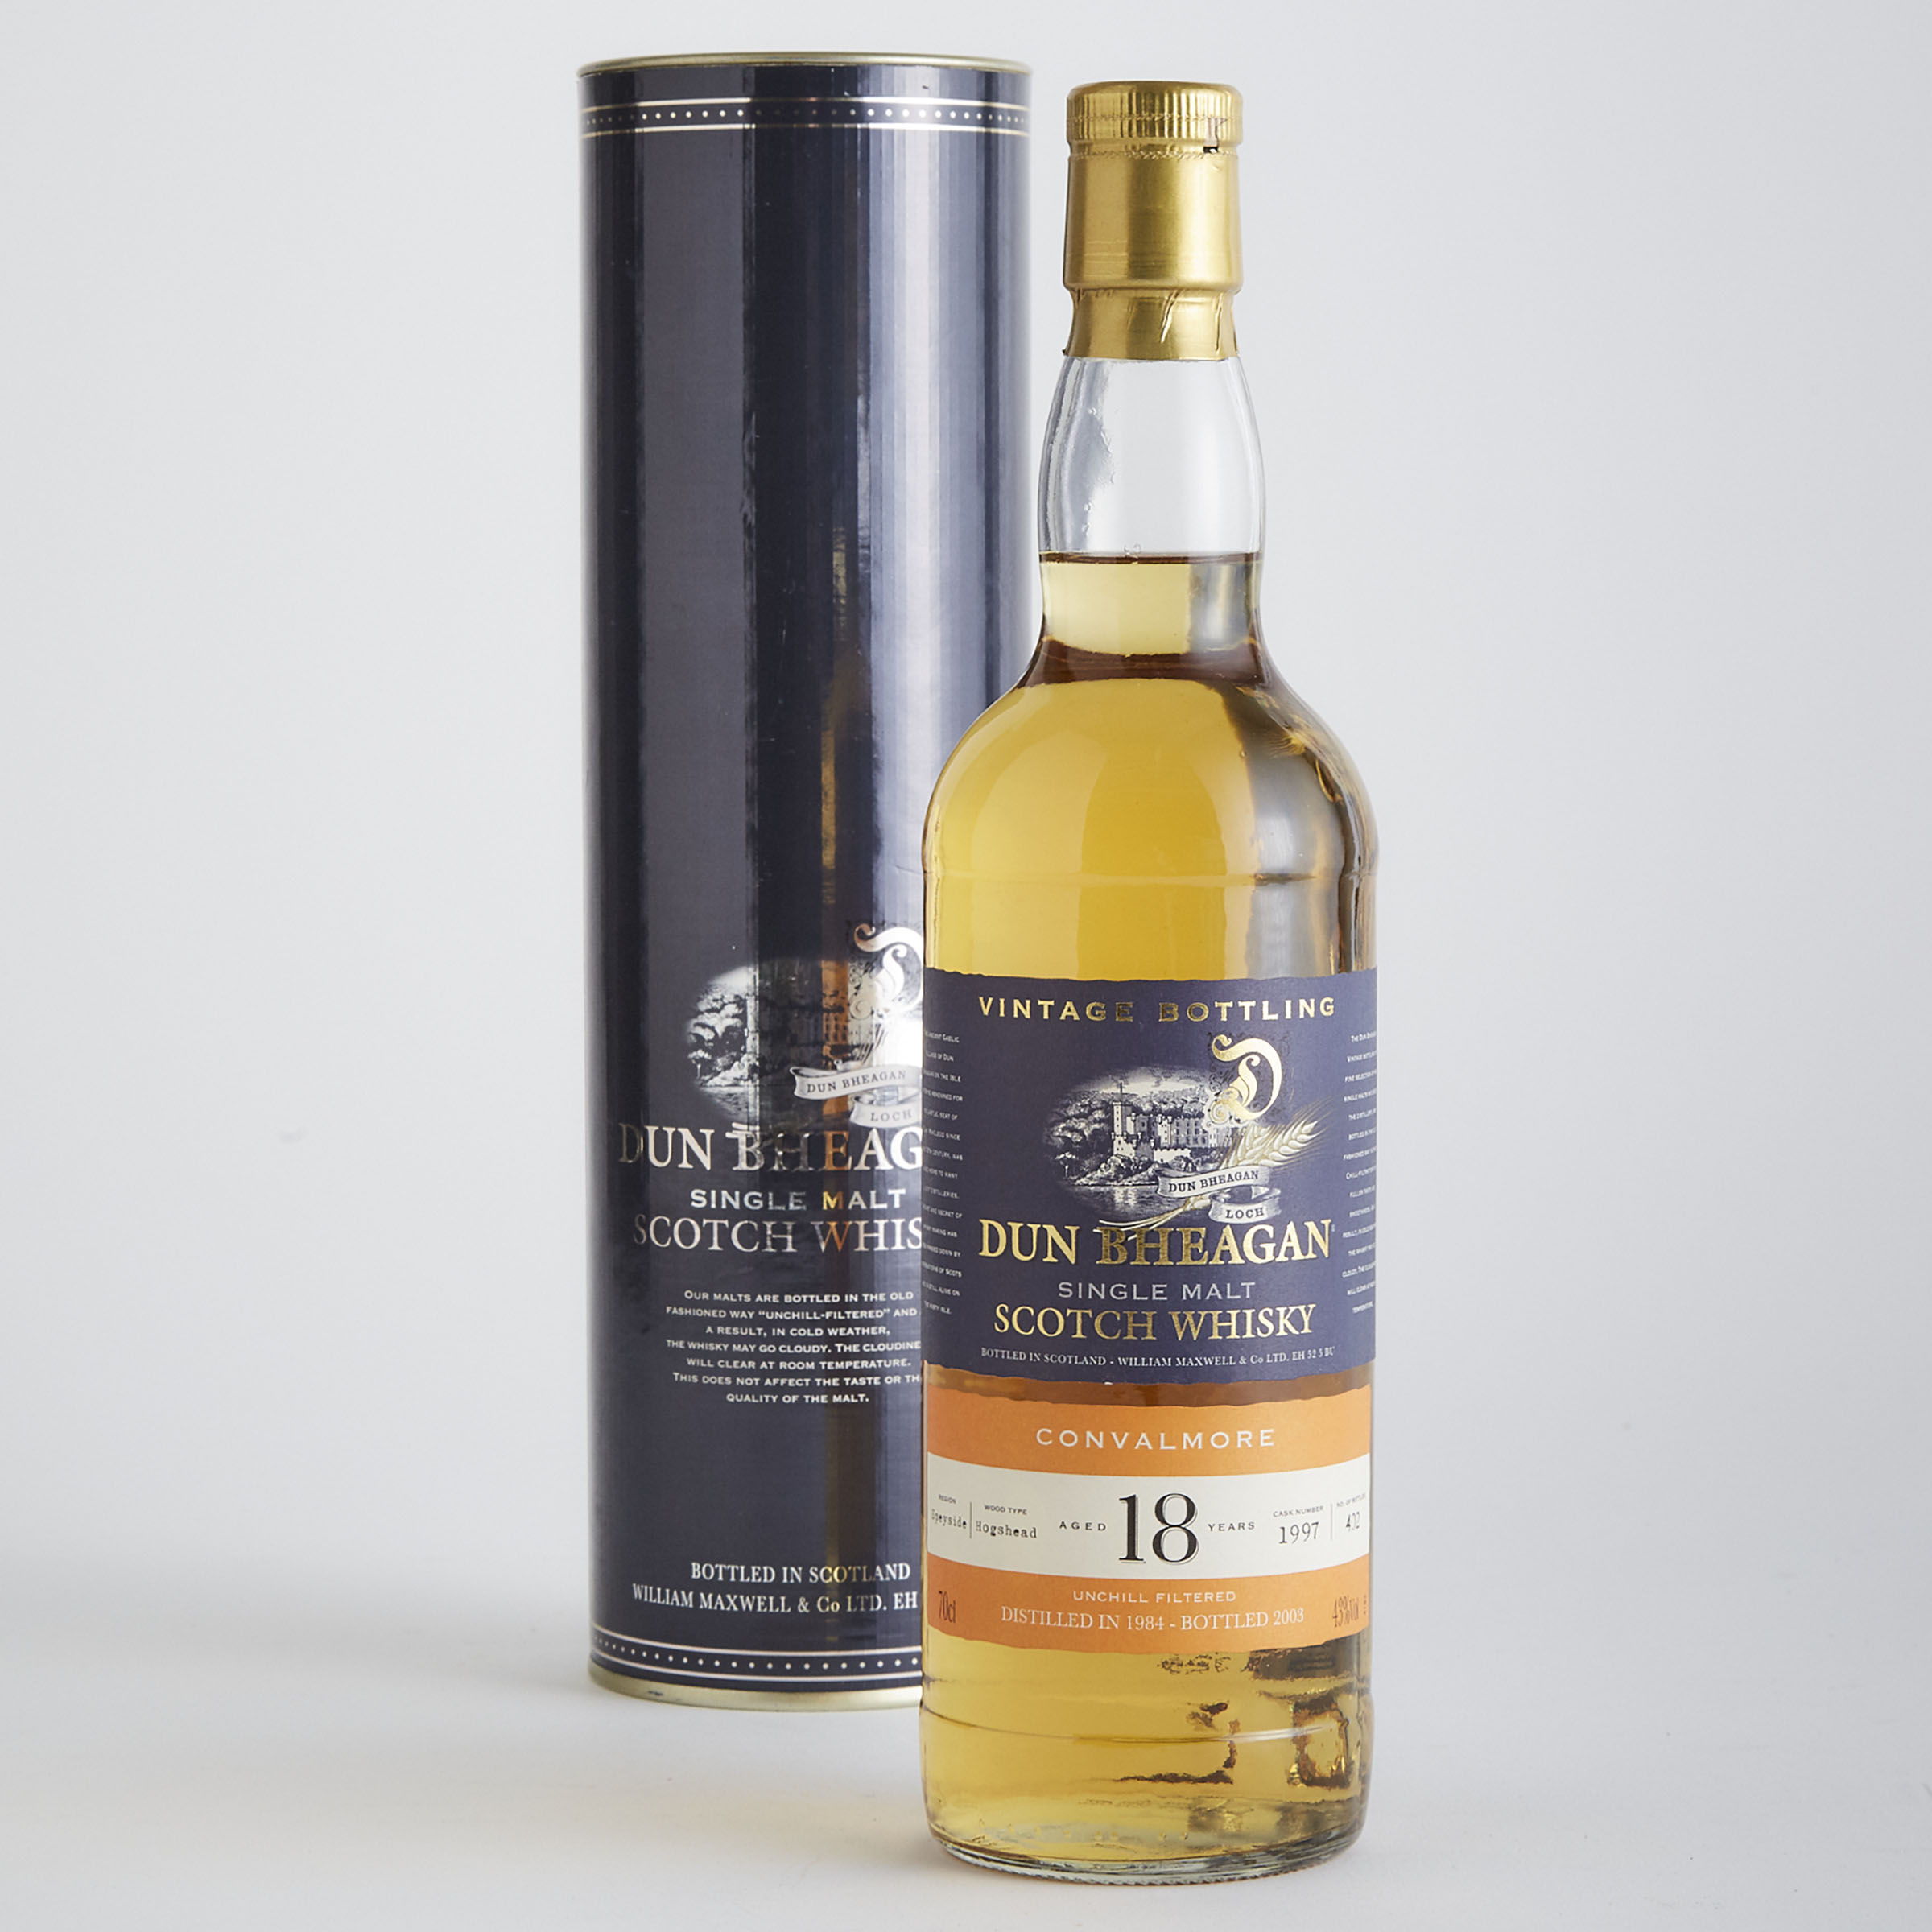 CONVALMORE SINGLE MALT SCOTCH WHISKY 18 YEARS (ONE 70 CL)